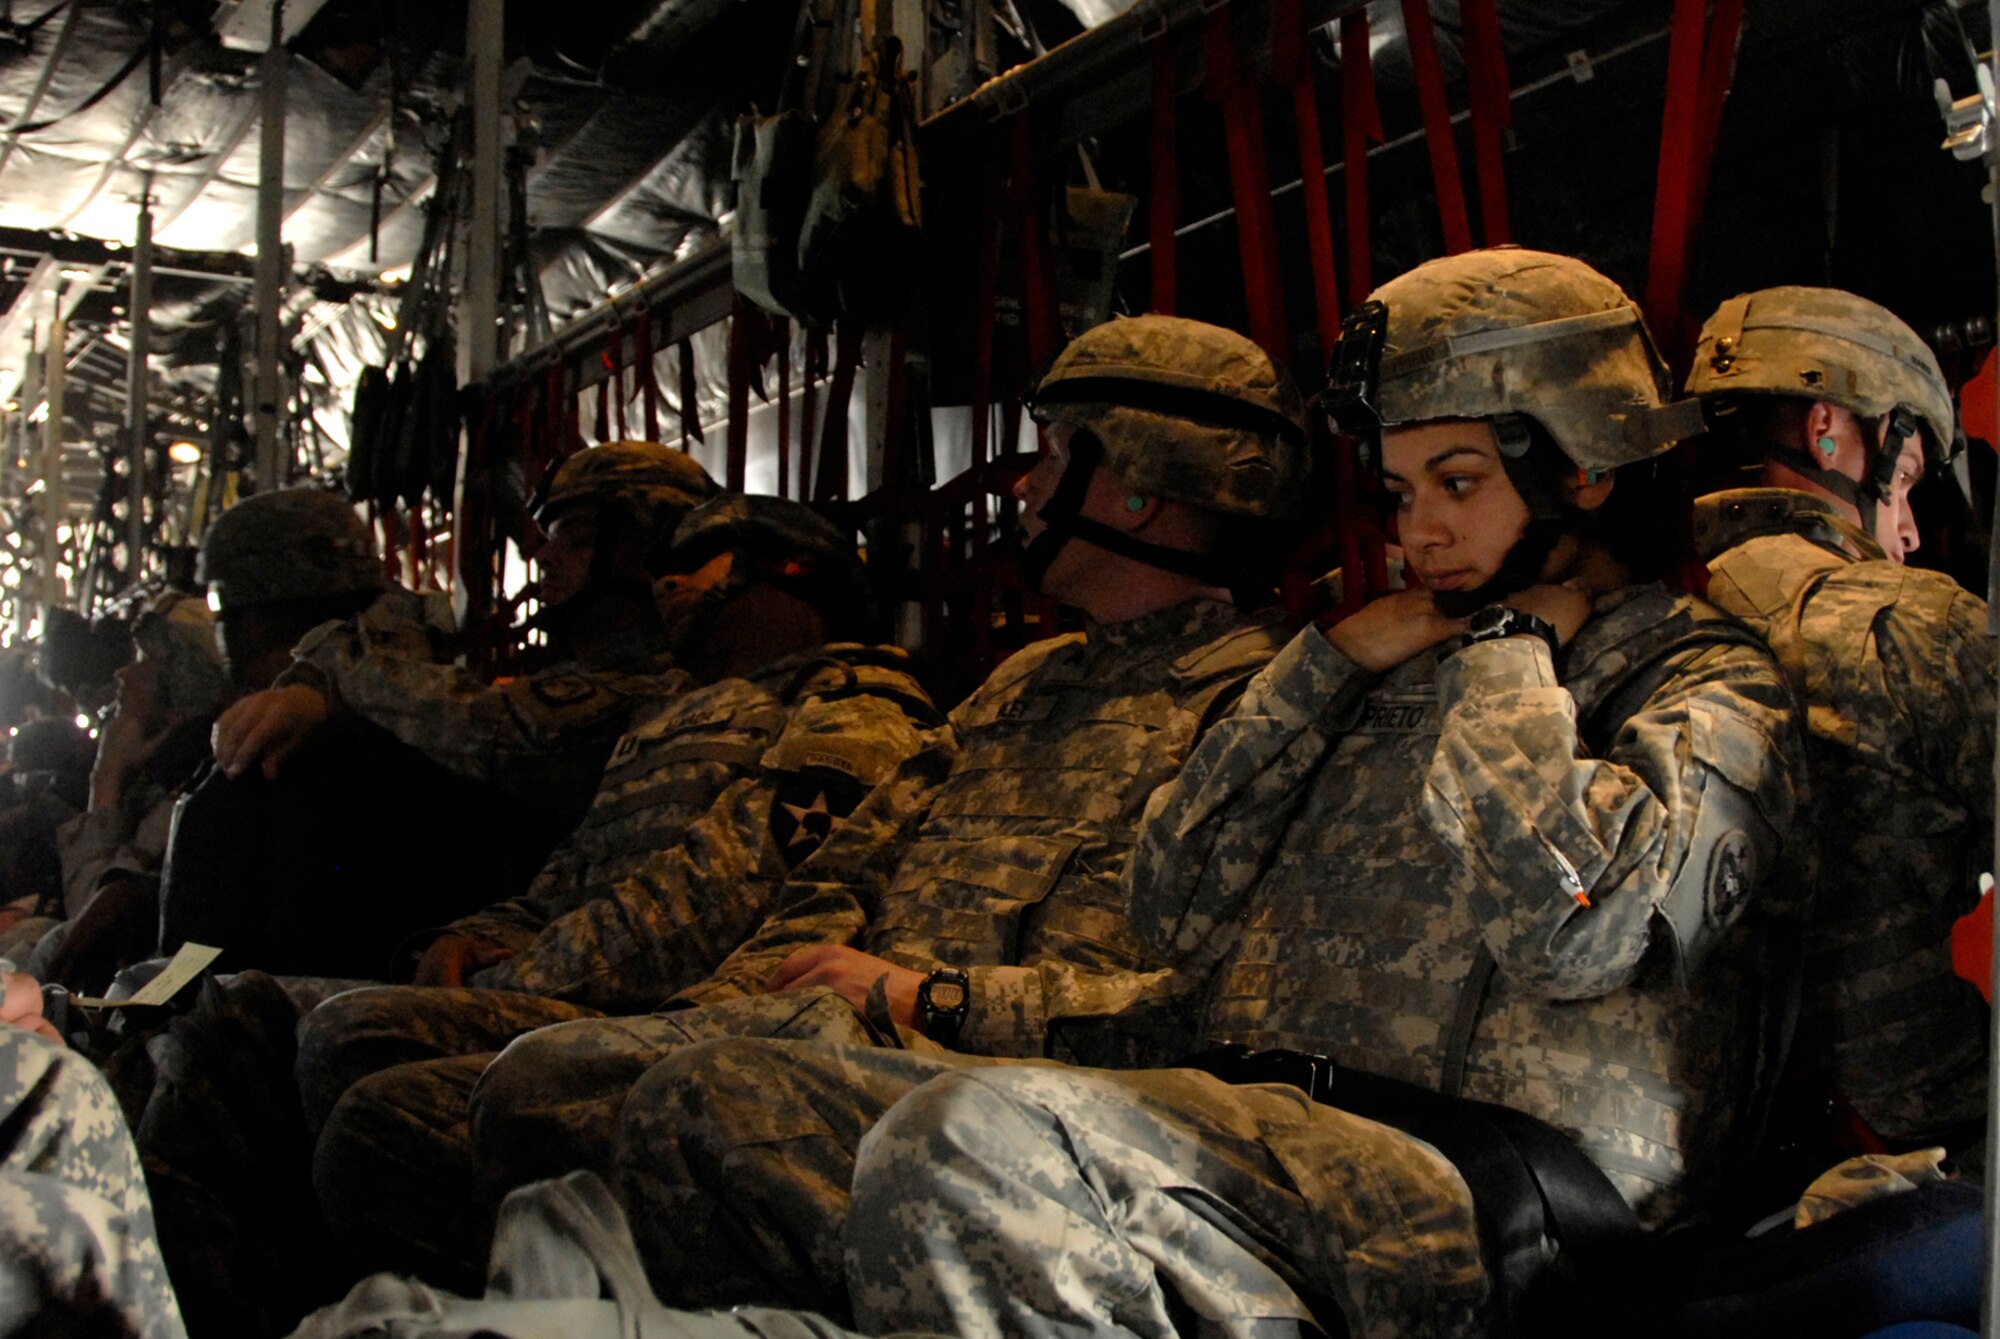 SOUTHWEST ASIA -- Soldiers fill up the seats of a U.S. Air Force C-130 Hercules during a combat sortie that is transported them into Iraq April 21, 2008, from an air base in the Persian Gulf Region. The Air Force recently surpassed more than one million sorties flown by Air Force aircraft in the Global War on Terror since Sept. 11, 2001. Synchronized and integrated into larger coalition air efforts, these missions represent the most deliberate, disciplined and precise air campaign in history. (U.S. Air Force photo/ Staff Sgt. Patrick Dixon)